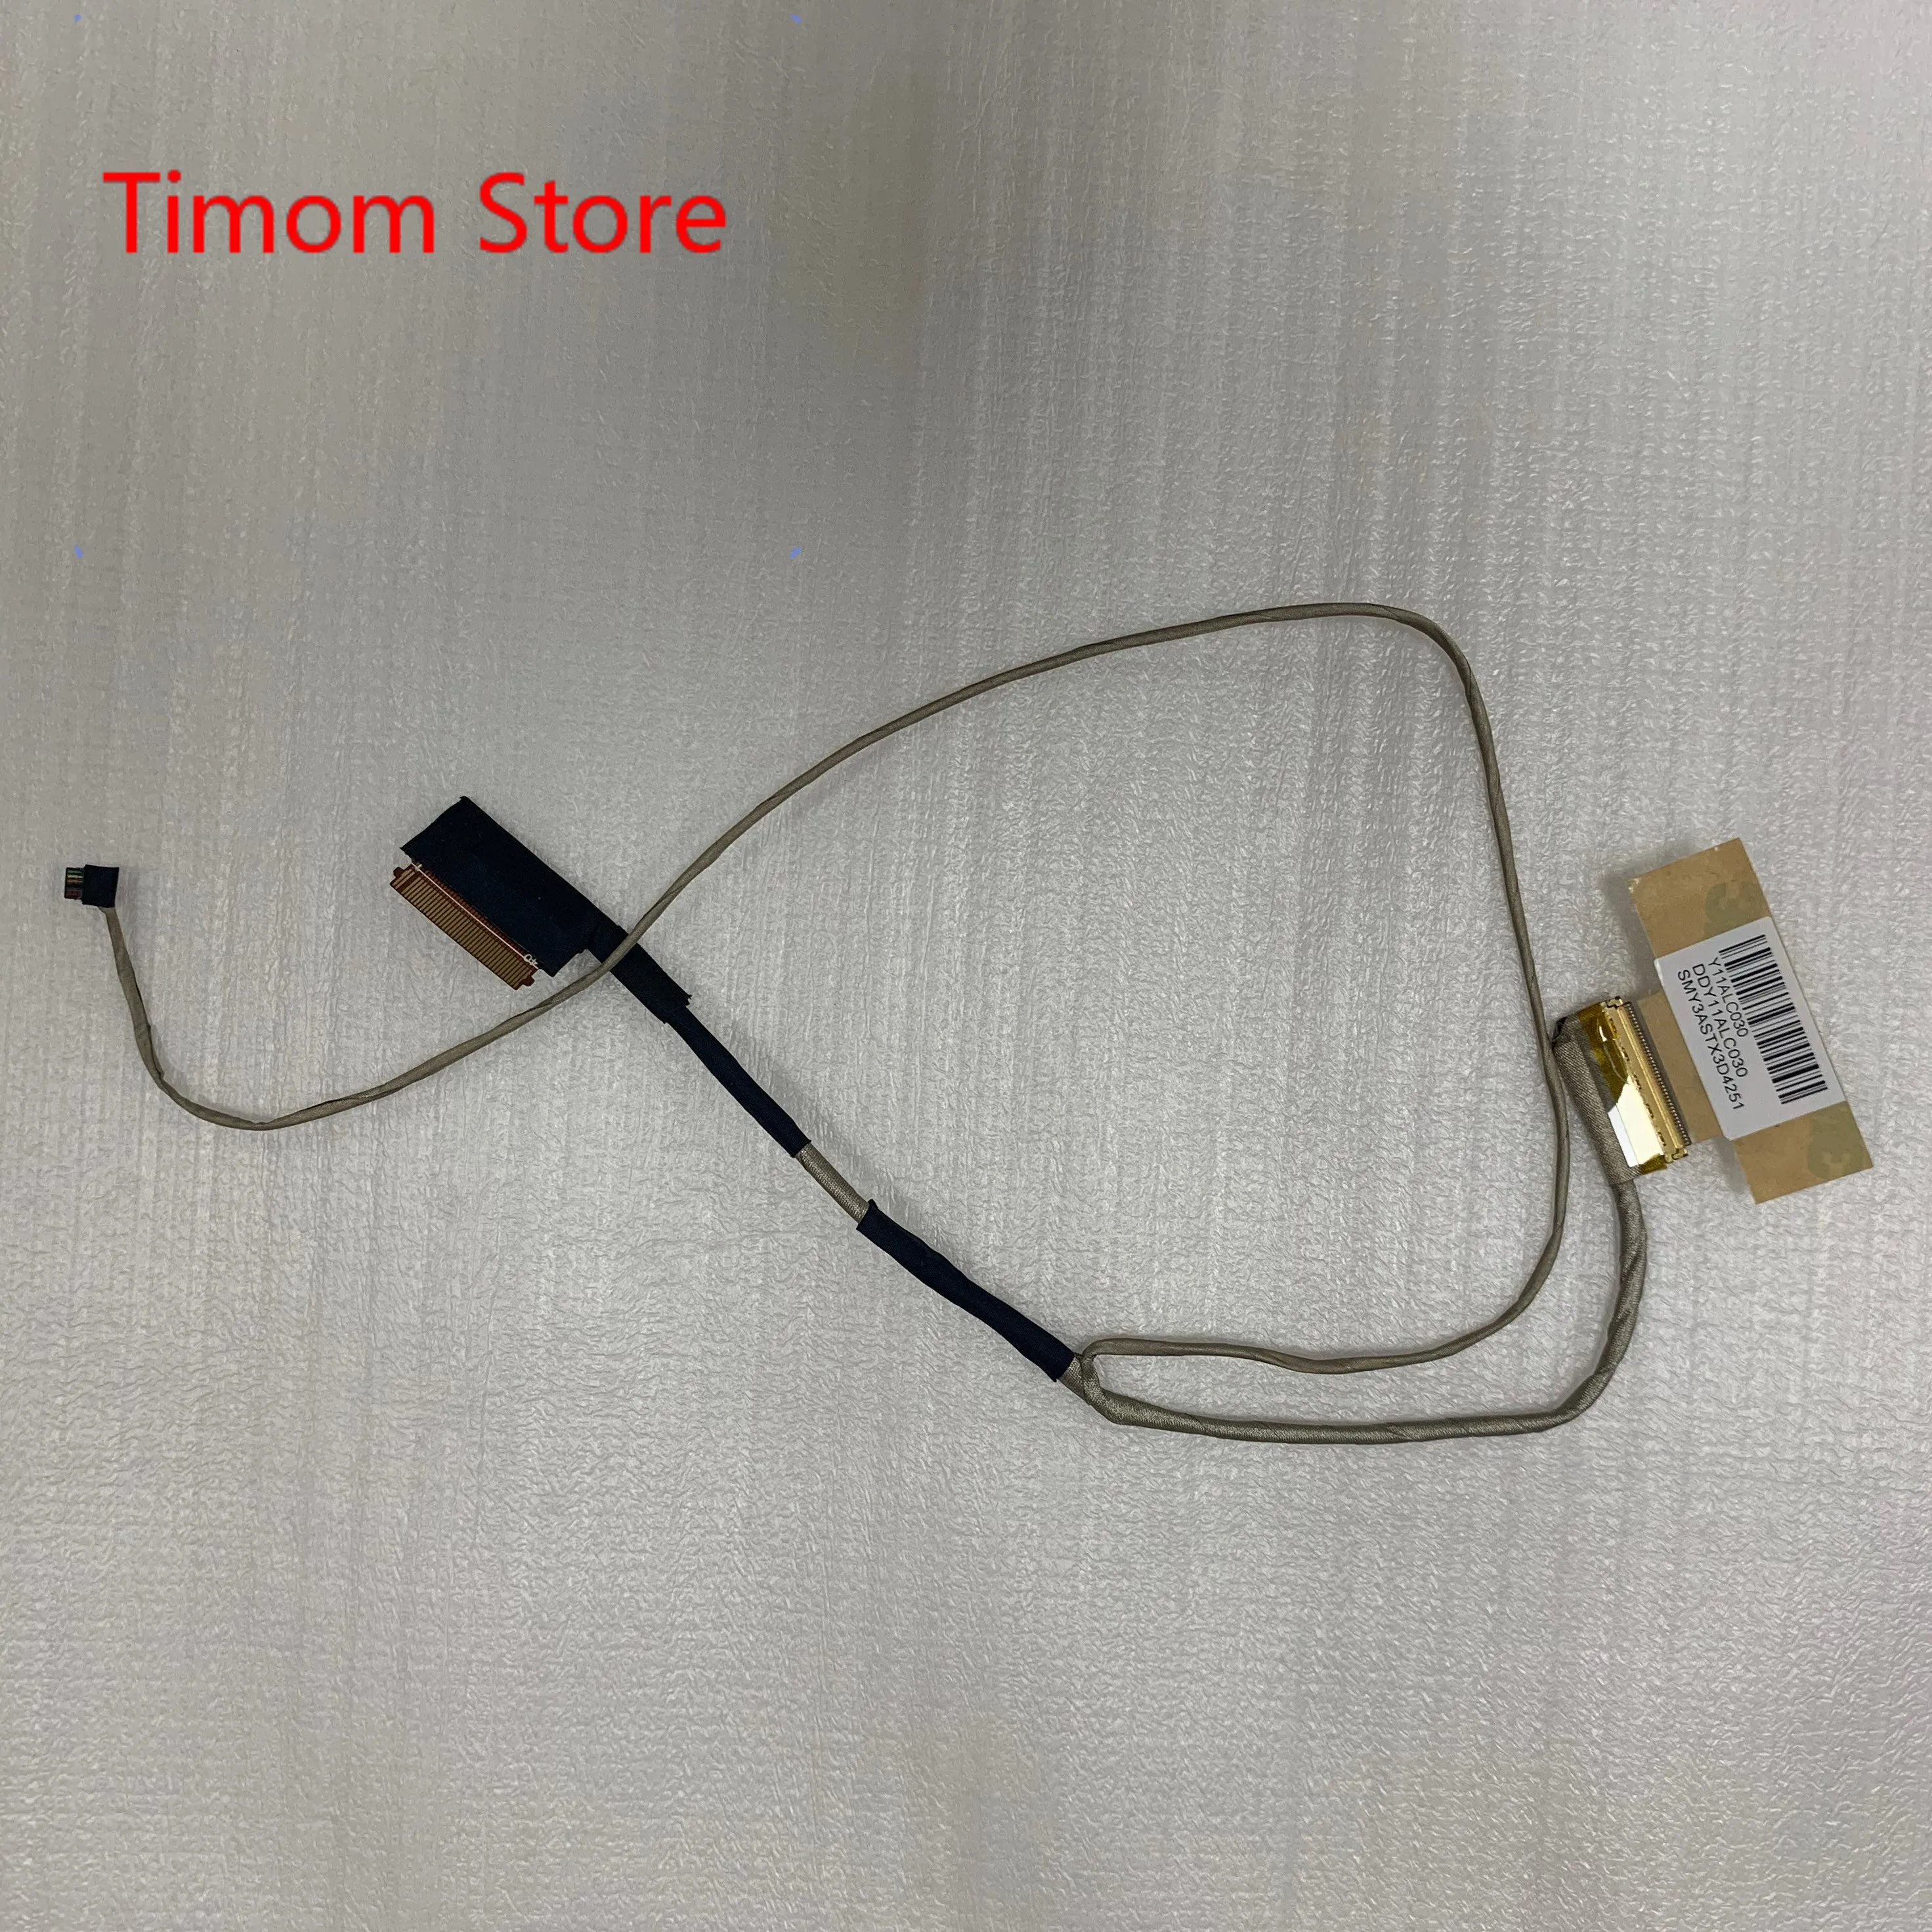 

DDY11ALC030 VIDEO SCREEN CABLE for HP Pavilion 14-V 14-V014TX 14-V000 14-V049TX Series Flex LED LCD LVDS Cable